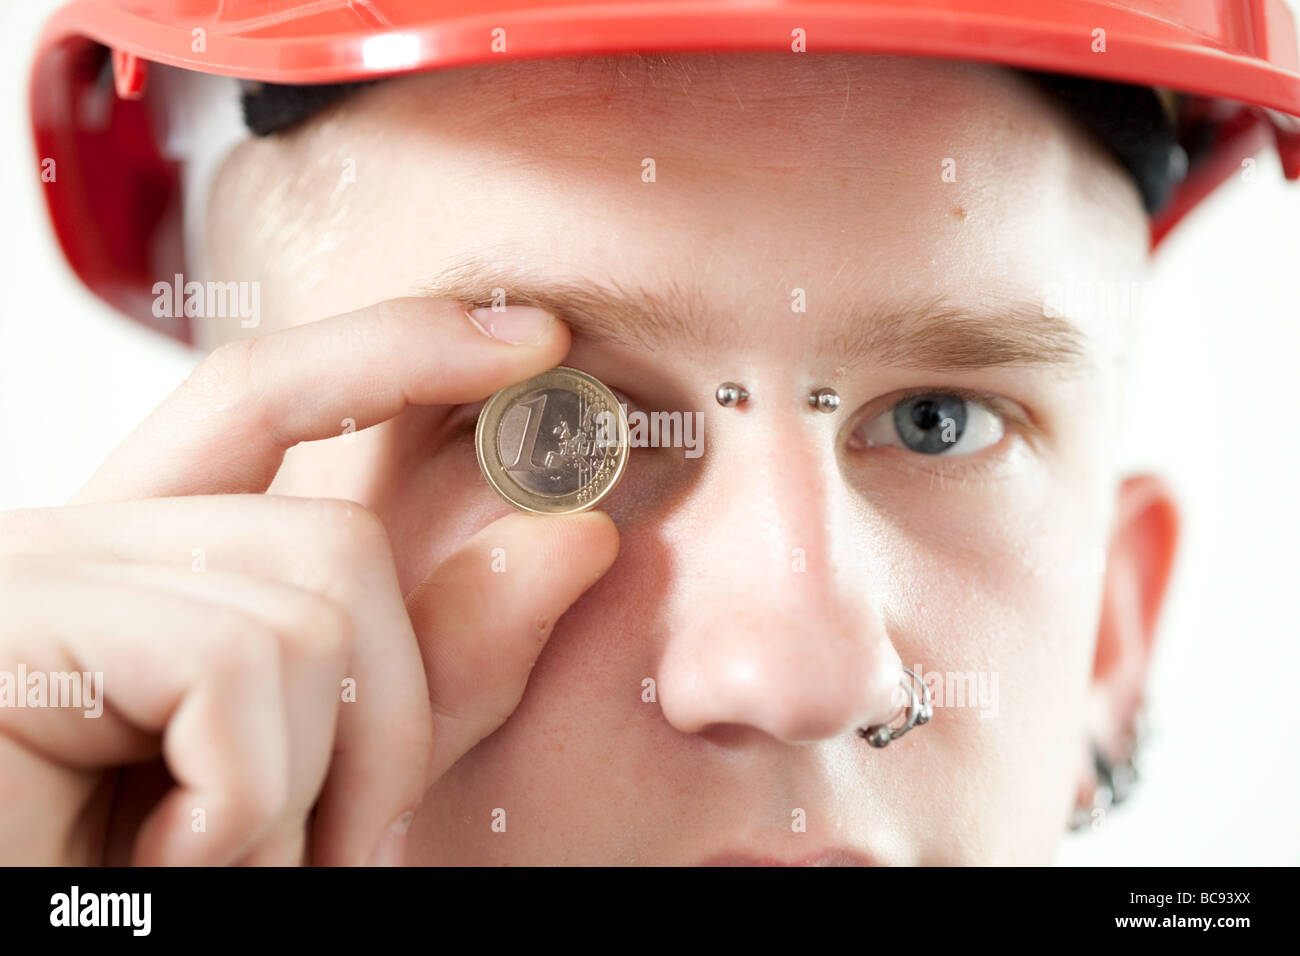 Trainee wearing safty hat and holding an euro coin Stock Photo